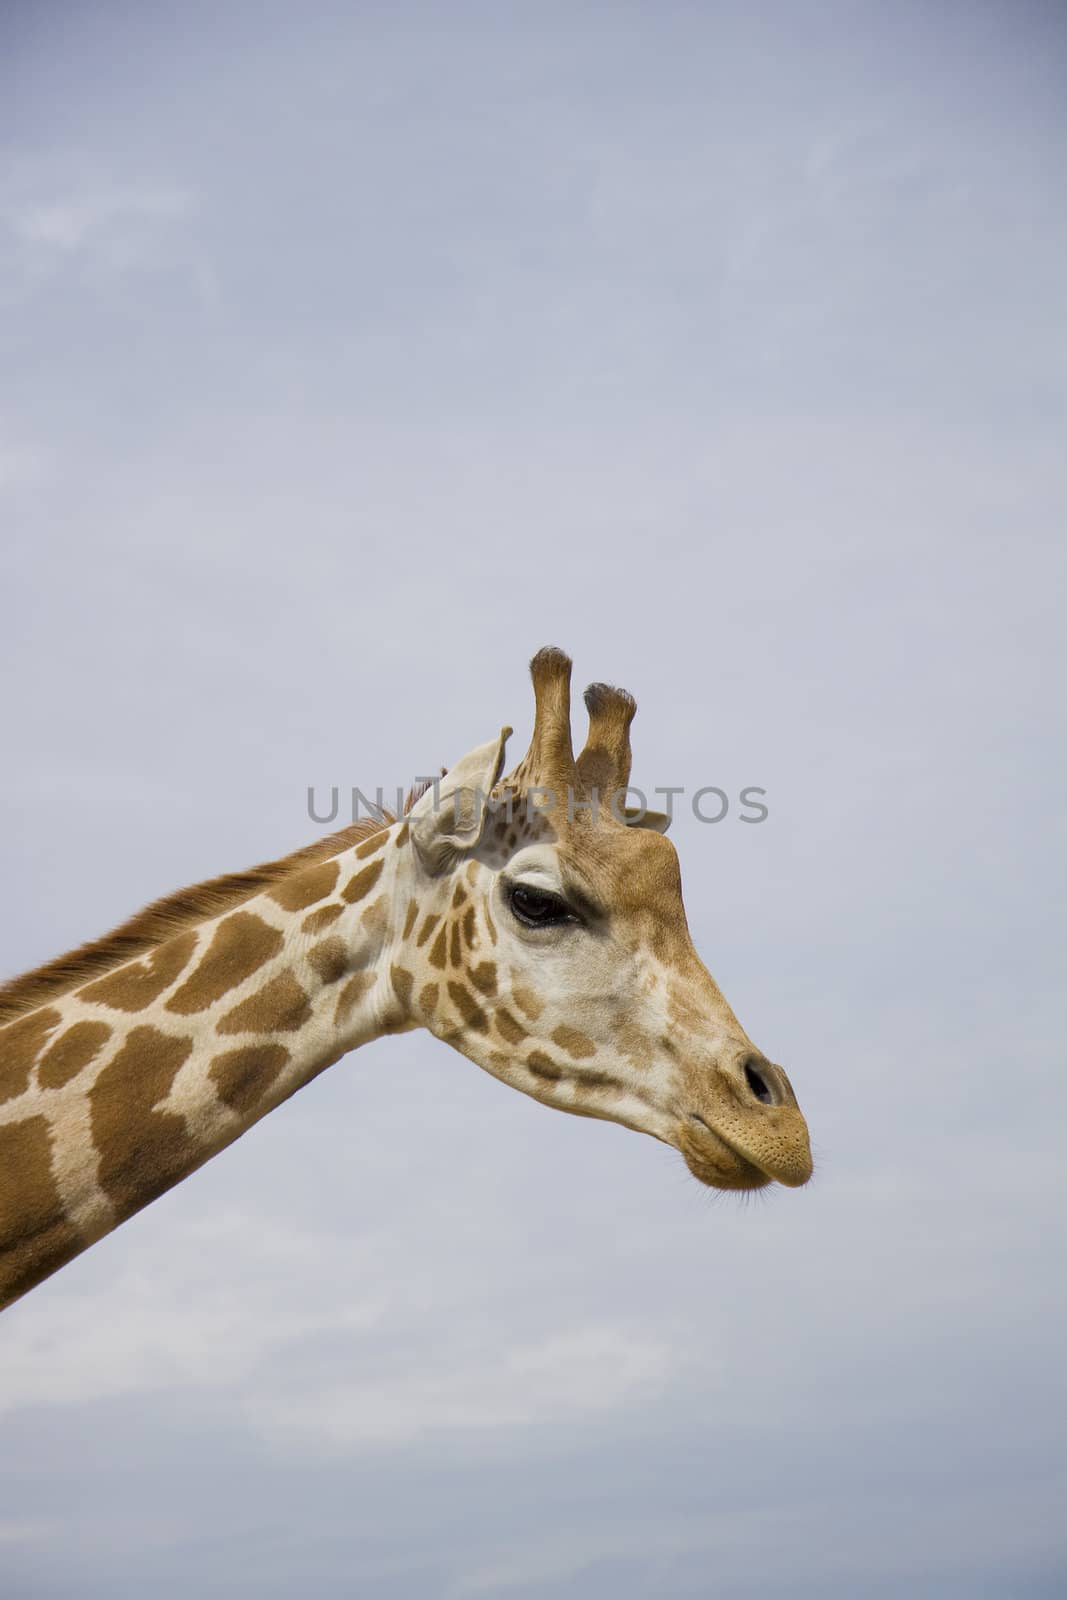 A profile close-up shot of a giraffe. Space for copy text